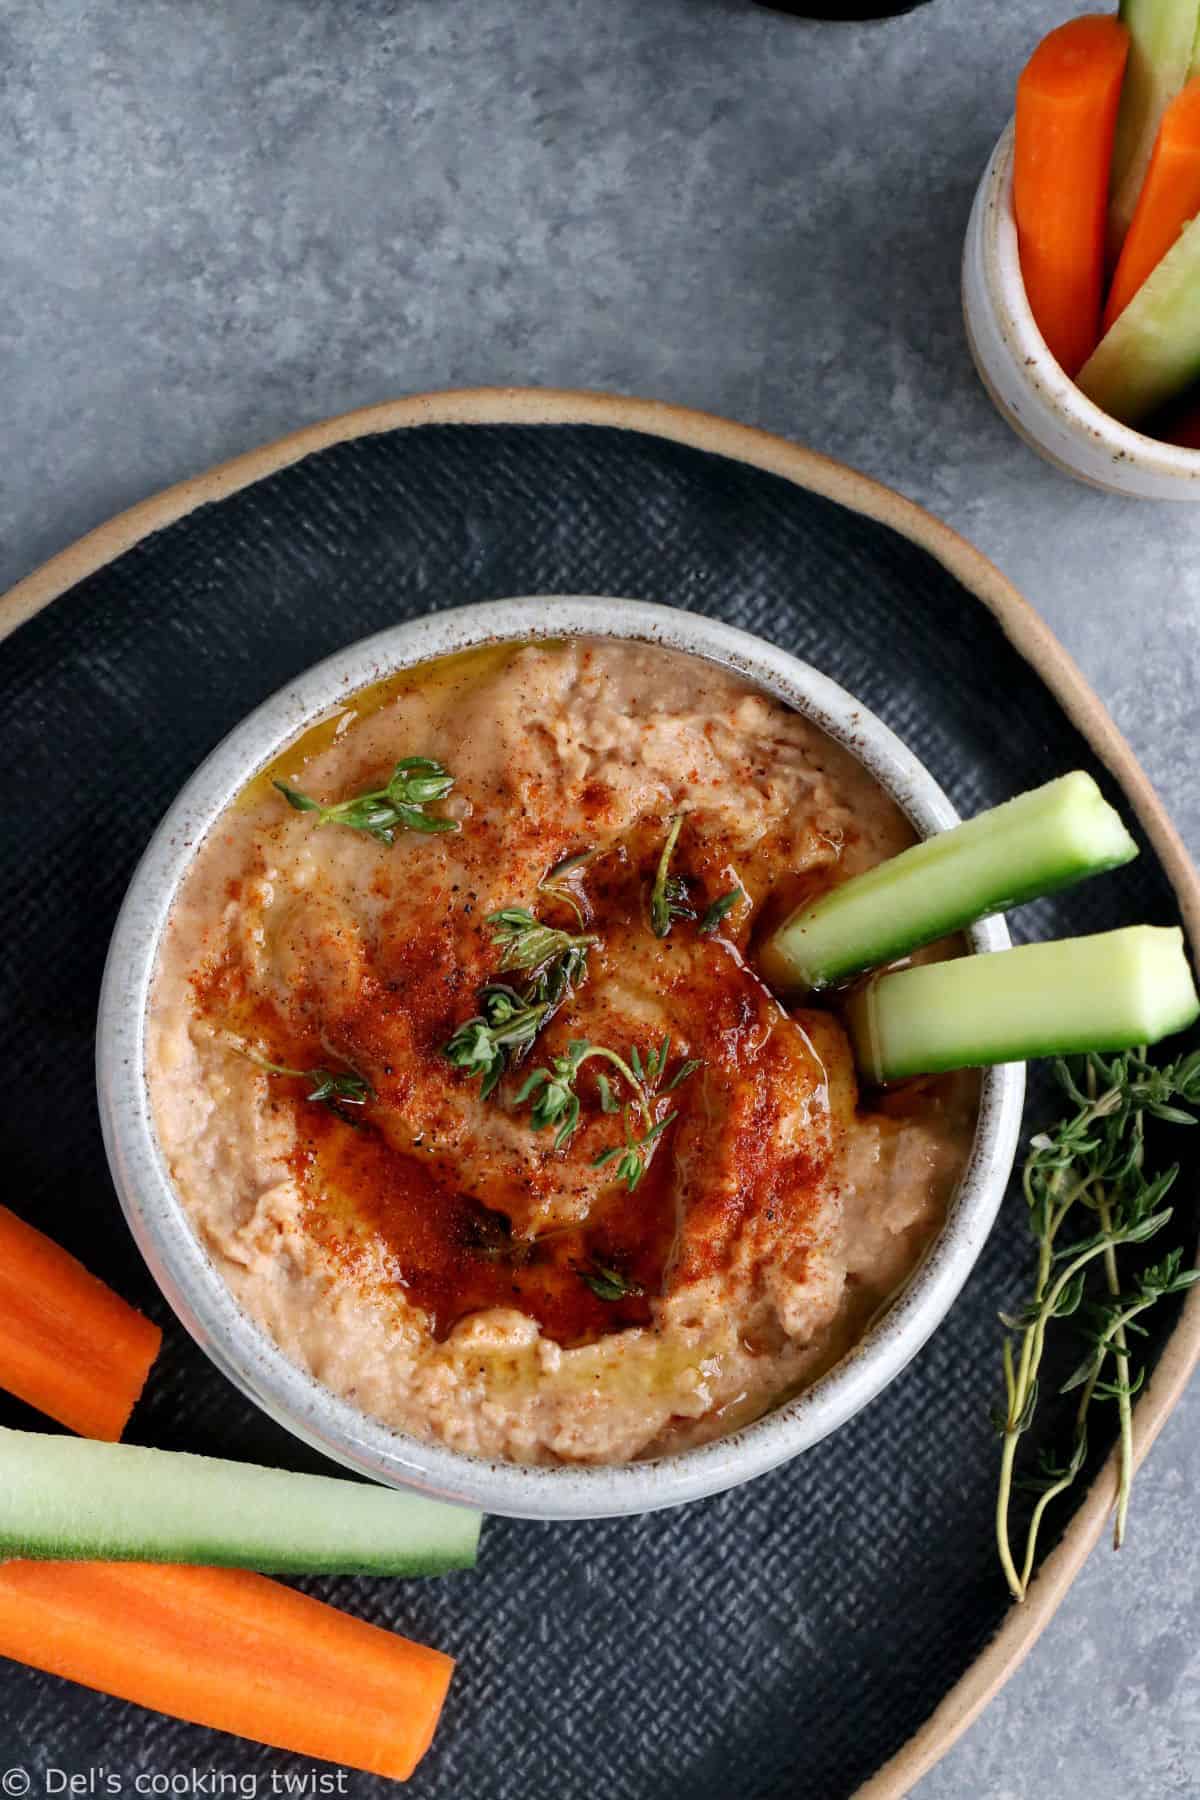 This smoky red lentil dip is quick, easy to prepare, with delicious smoky and spicy flavors.